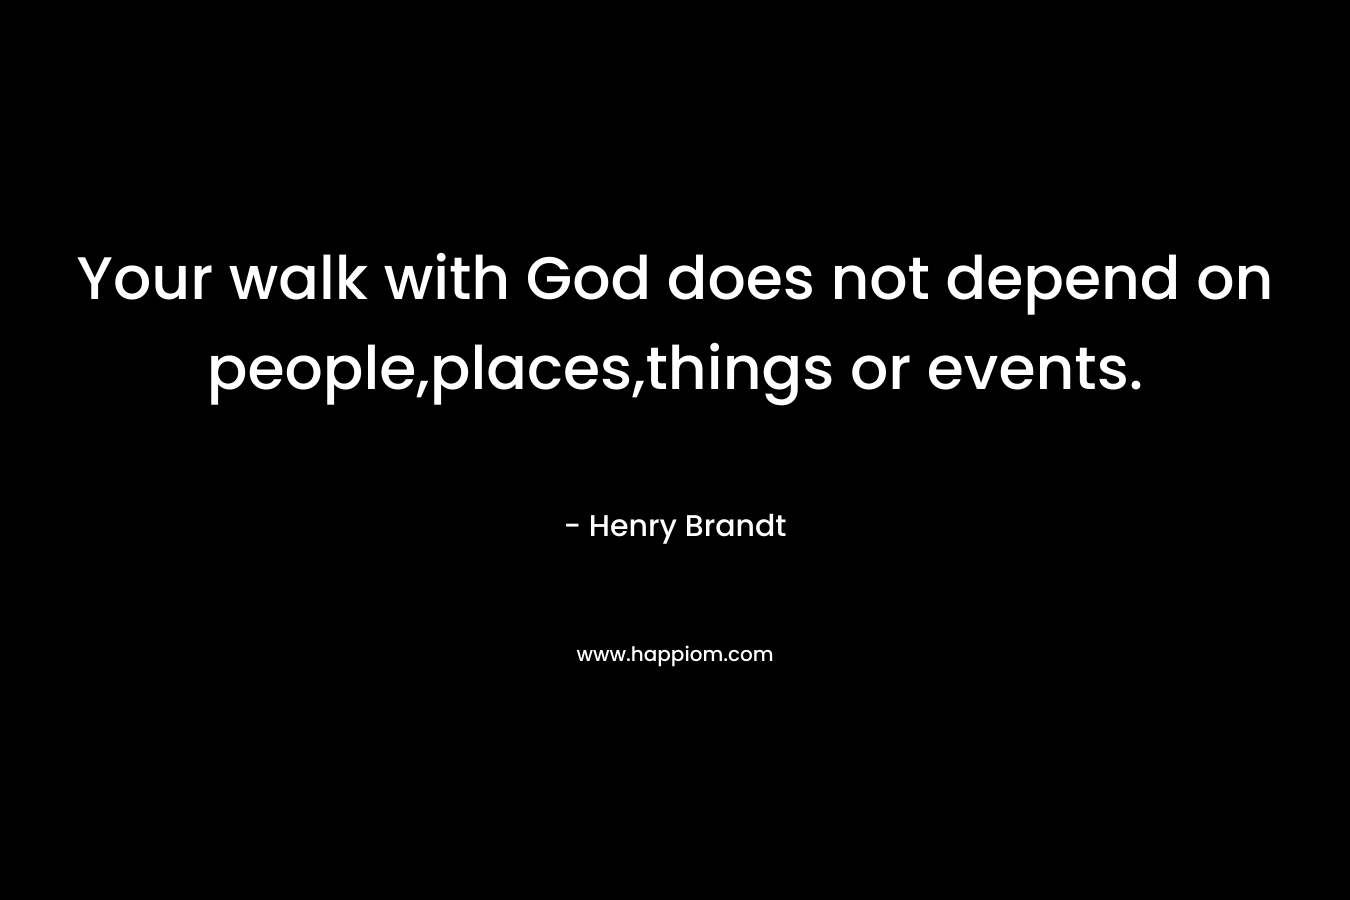 Your walk with God does not depend on people,places,things or events.